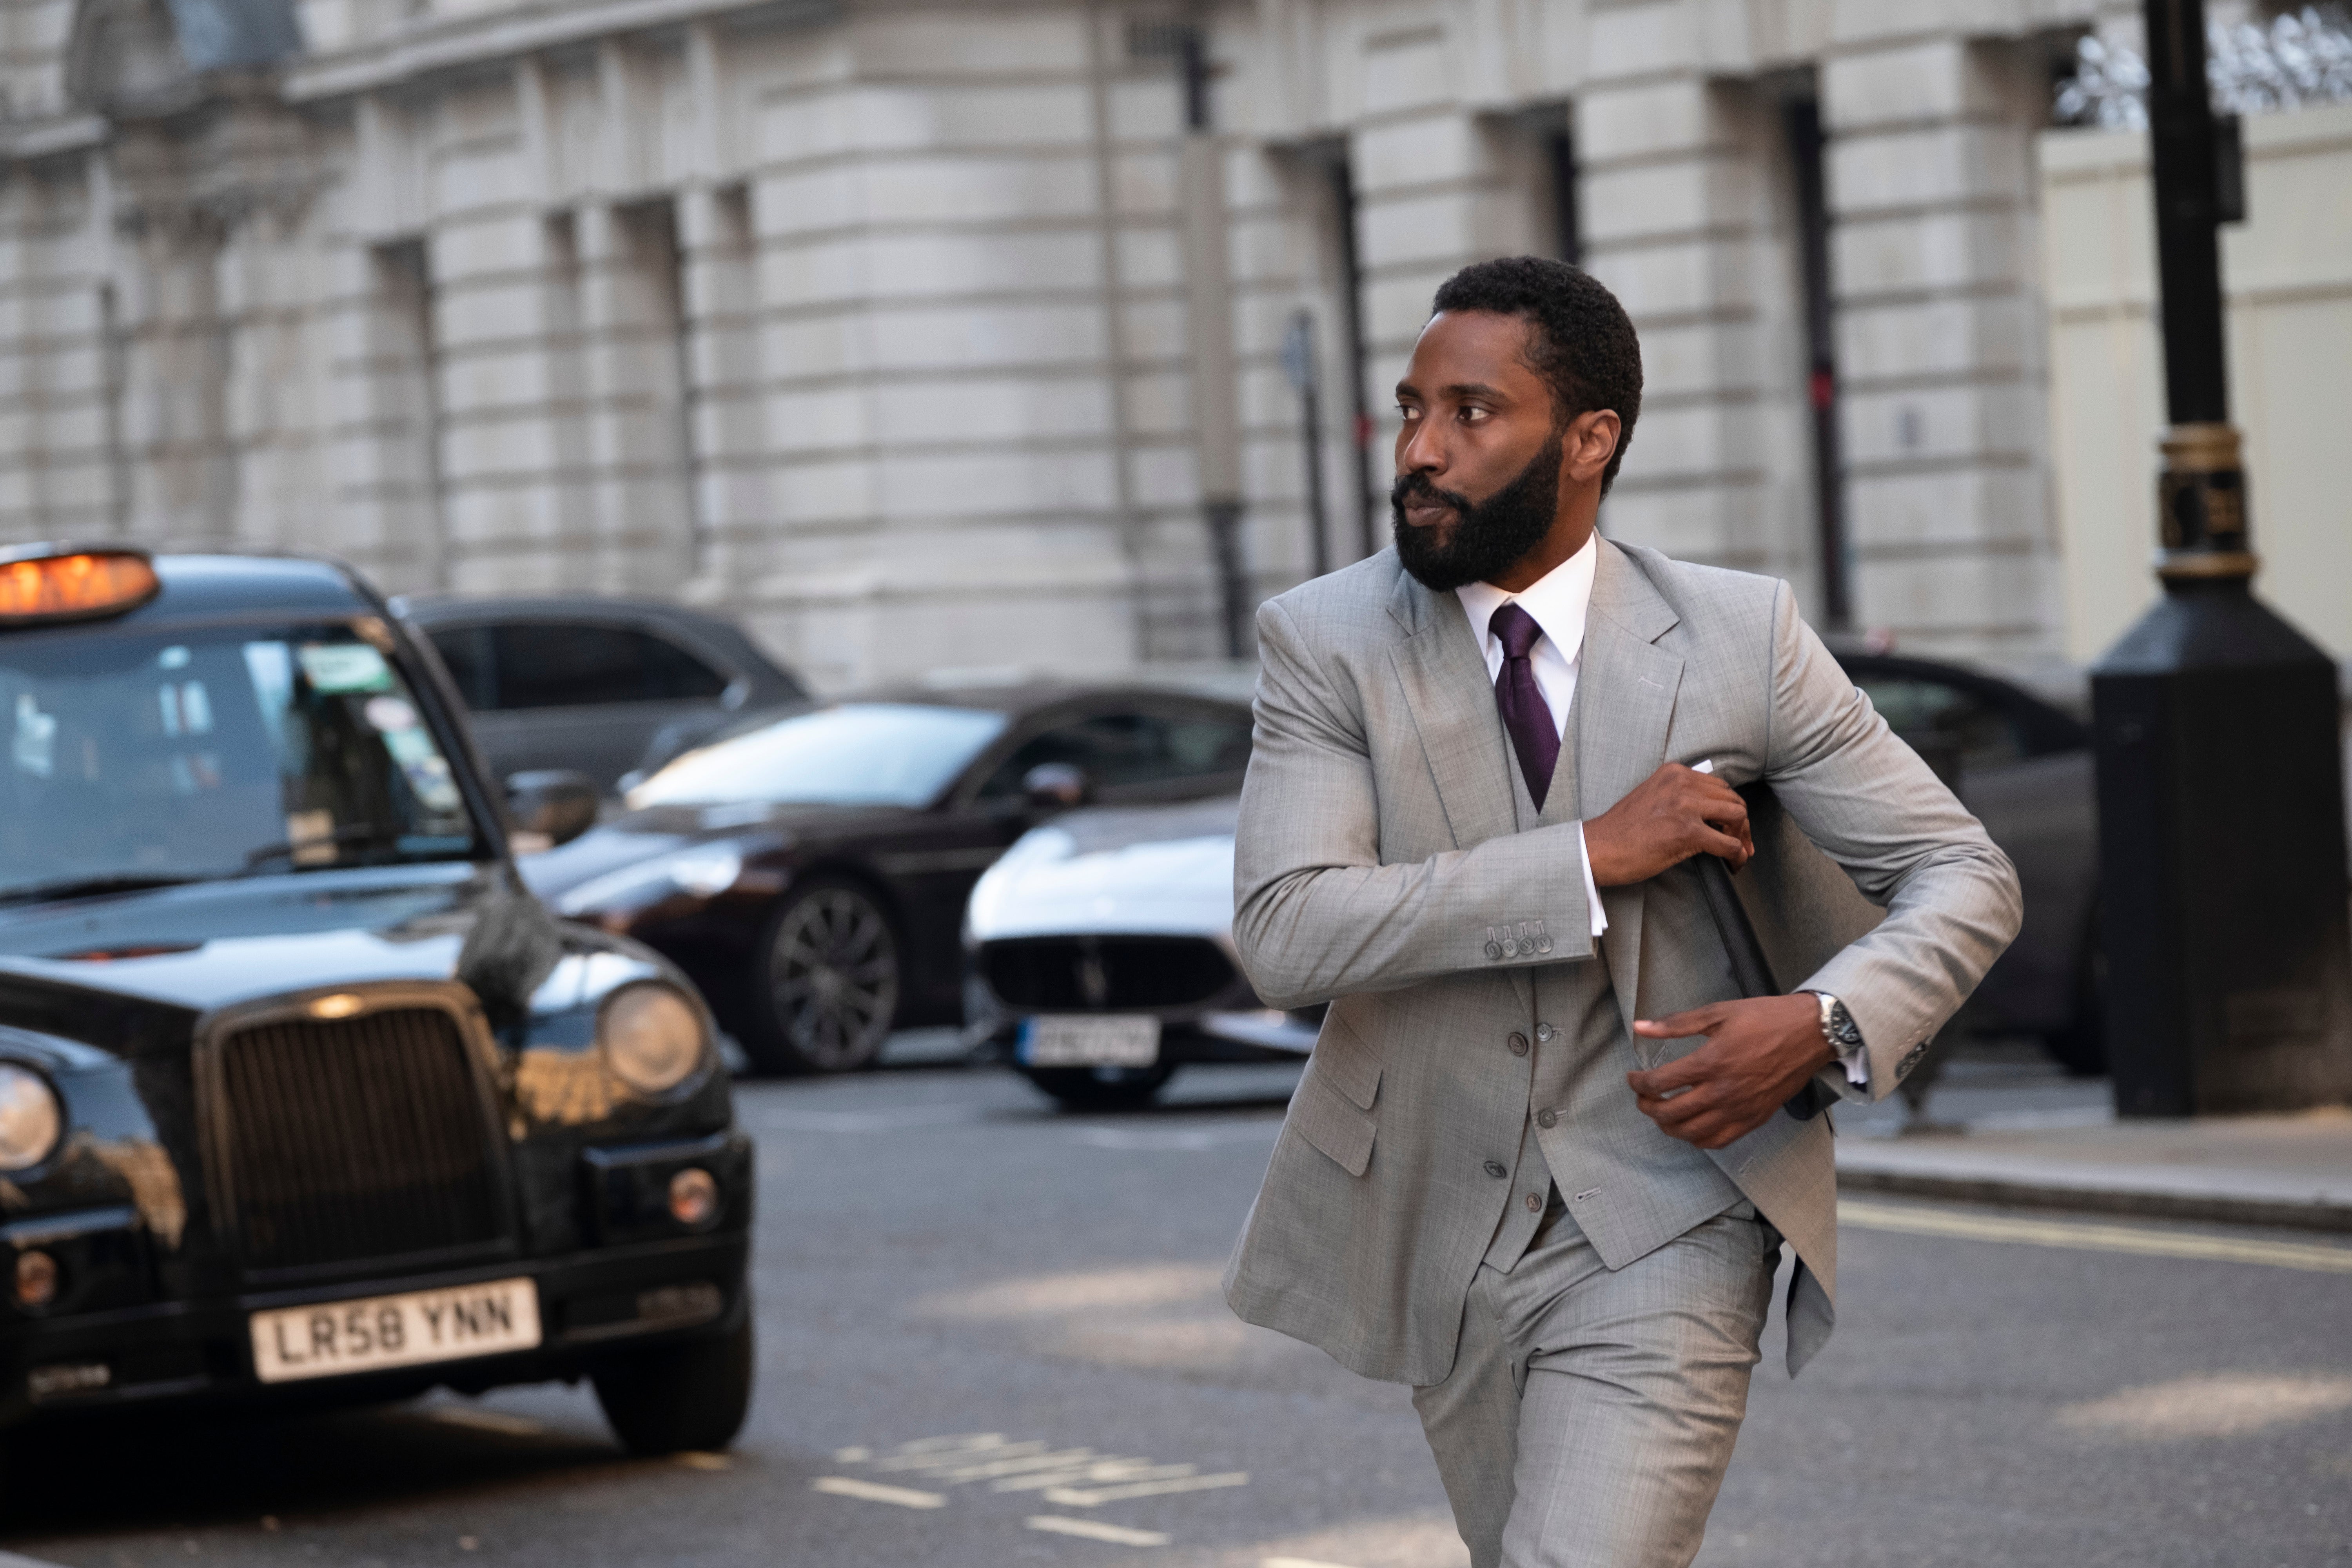 He strides confidently across the British streets, his beard neatly trimmed, his silver three piece neatly pressed.